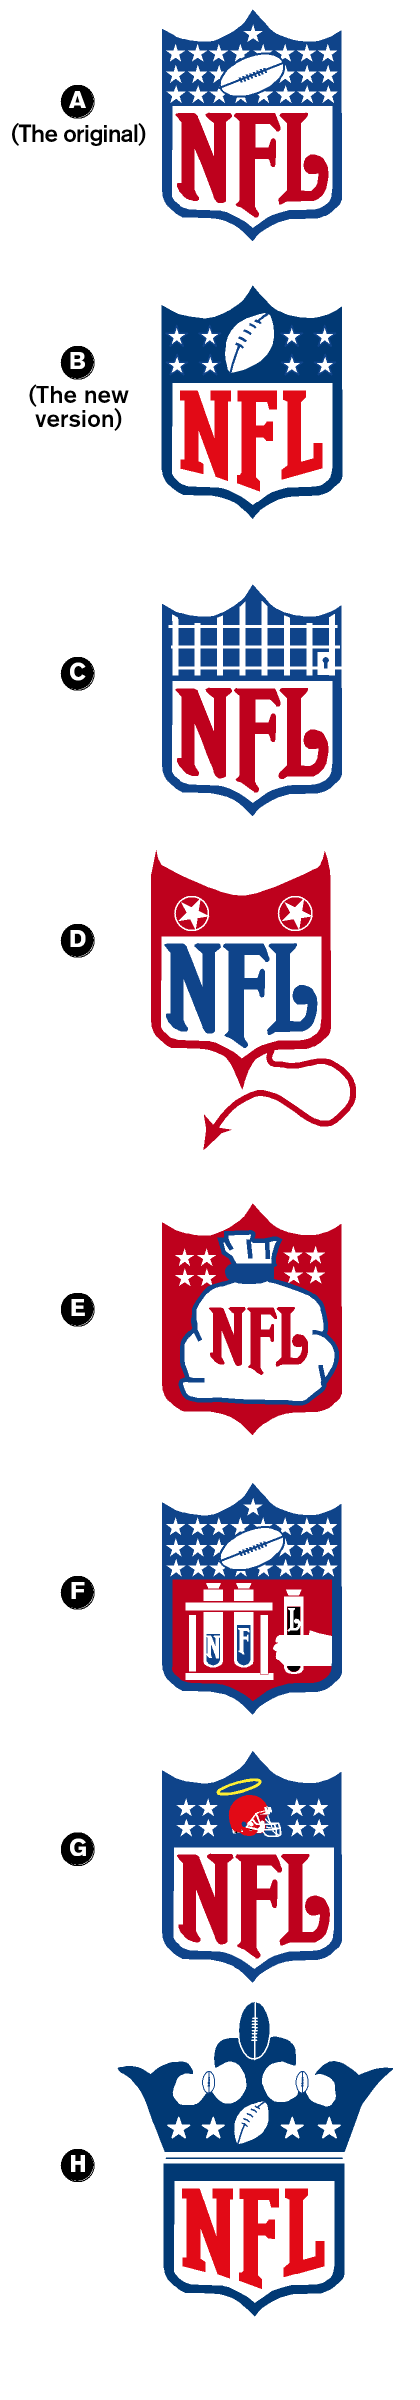 New ESPN Logo - NFL to change it's logo for 2008 - National Football League ...